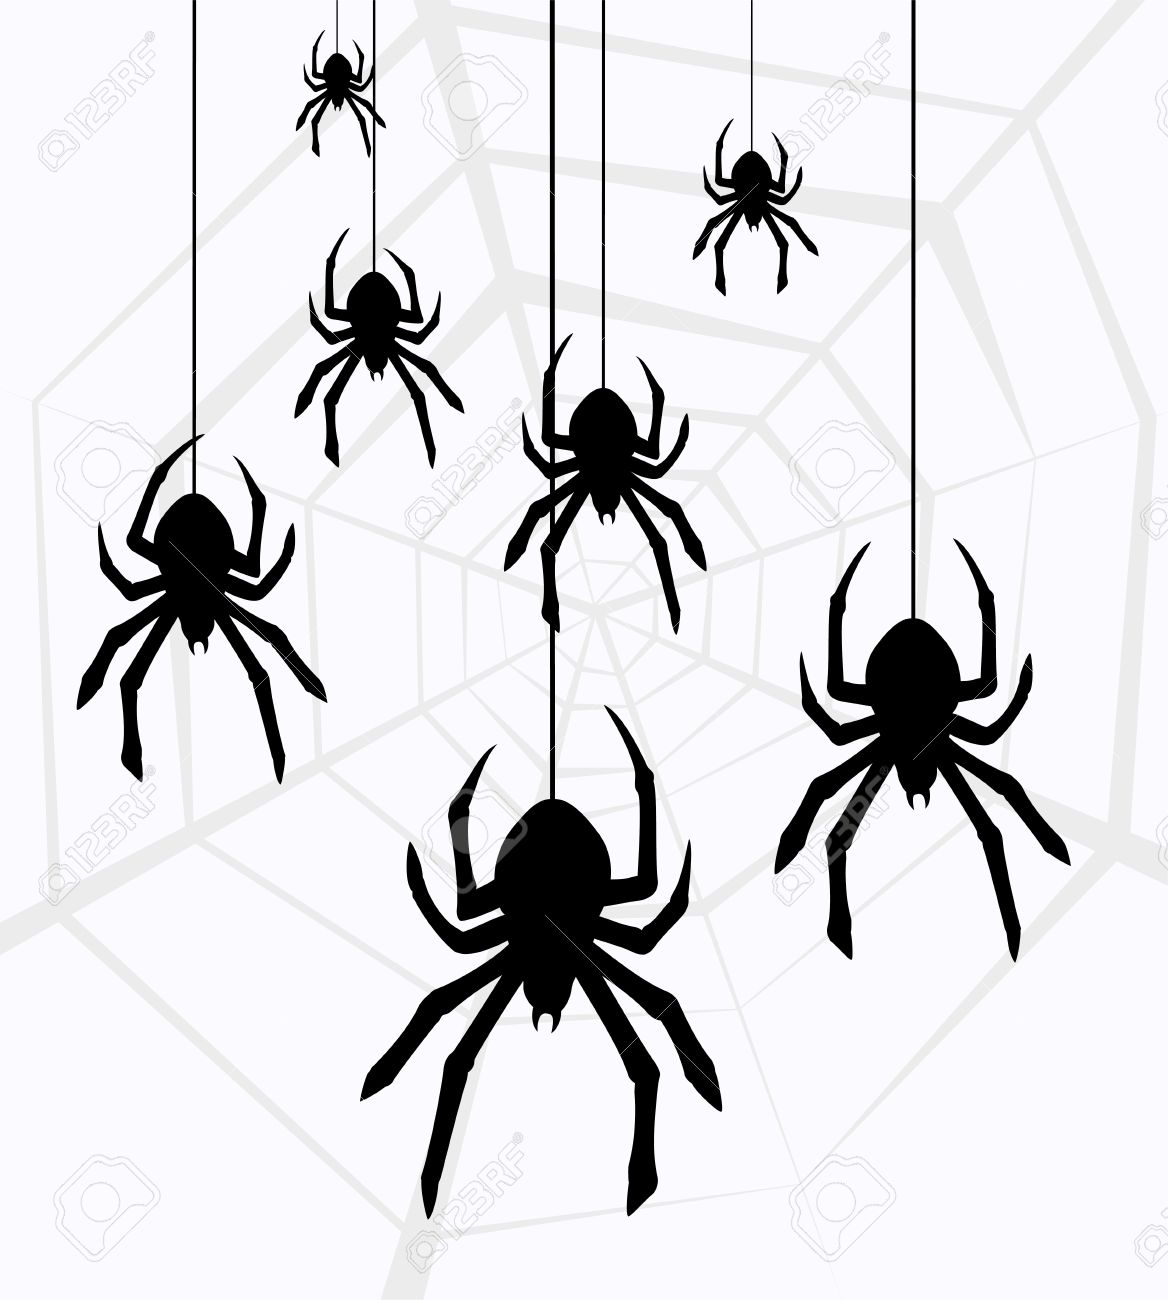 Spiders clipart - ClipartFest - Spiders Clip Art